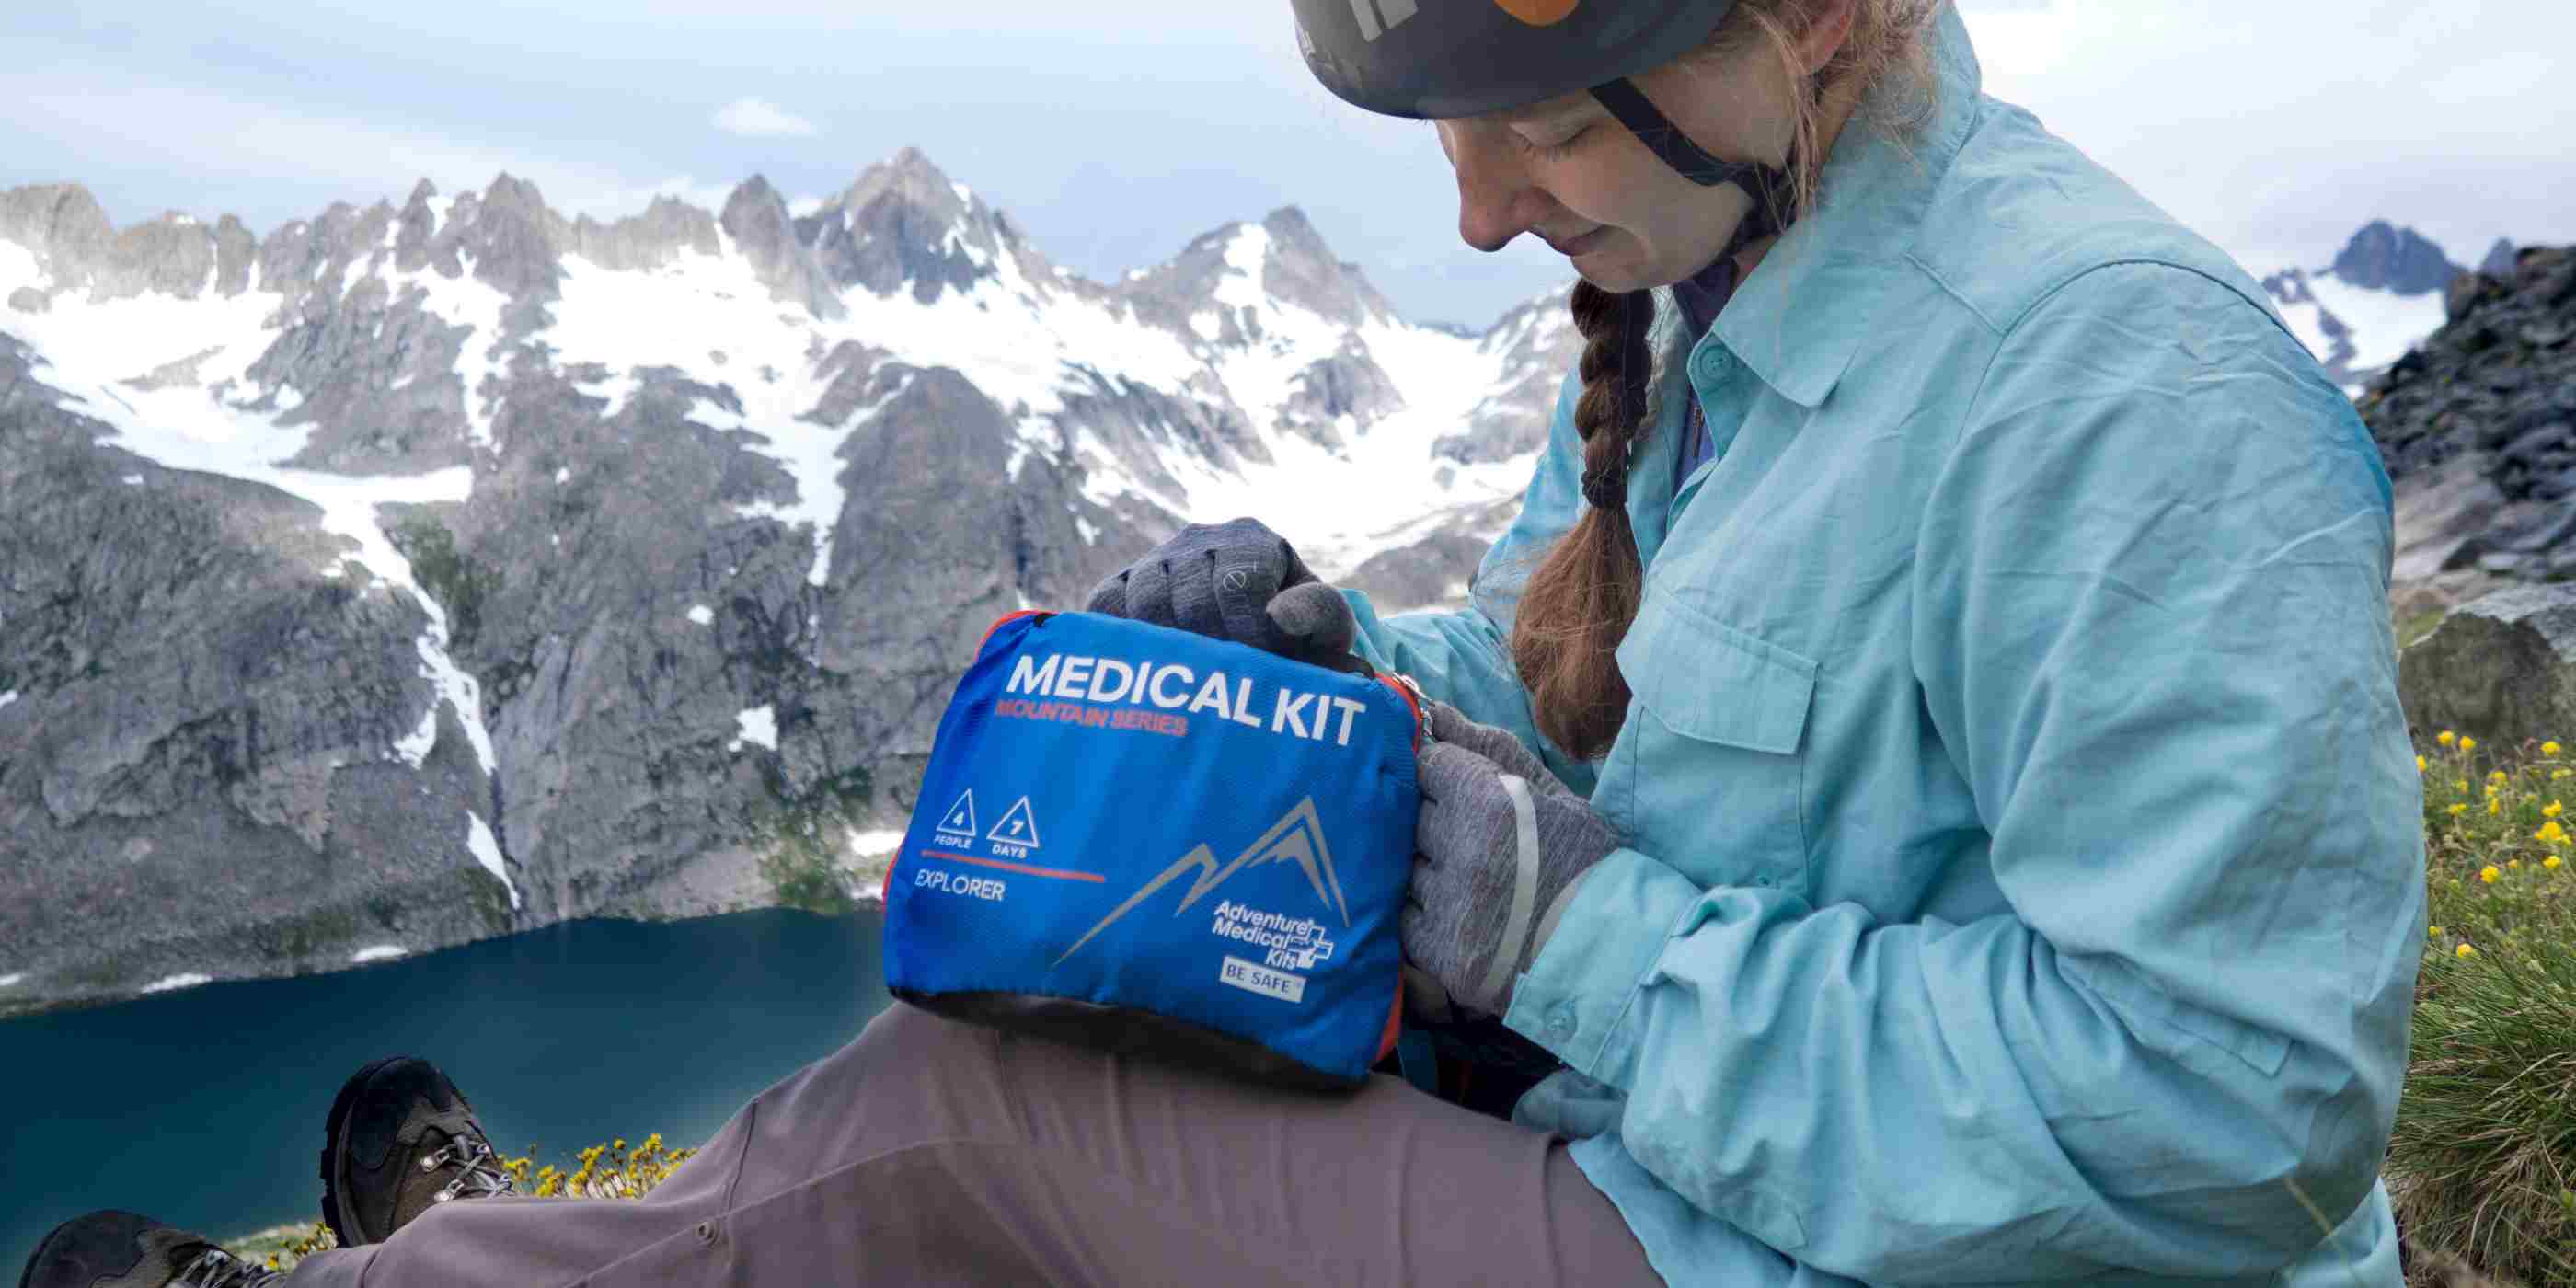 Mountain Series Medical Kit - Explorer woman in climbing gear opening kit in front of mountains